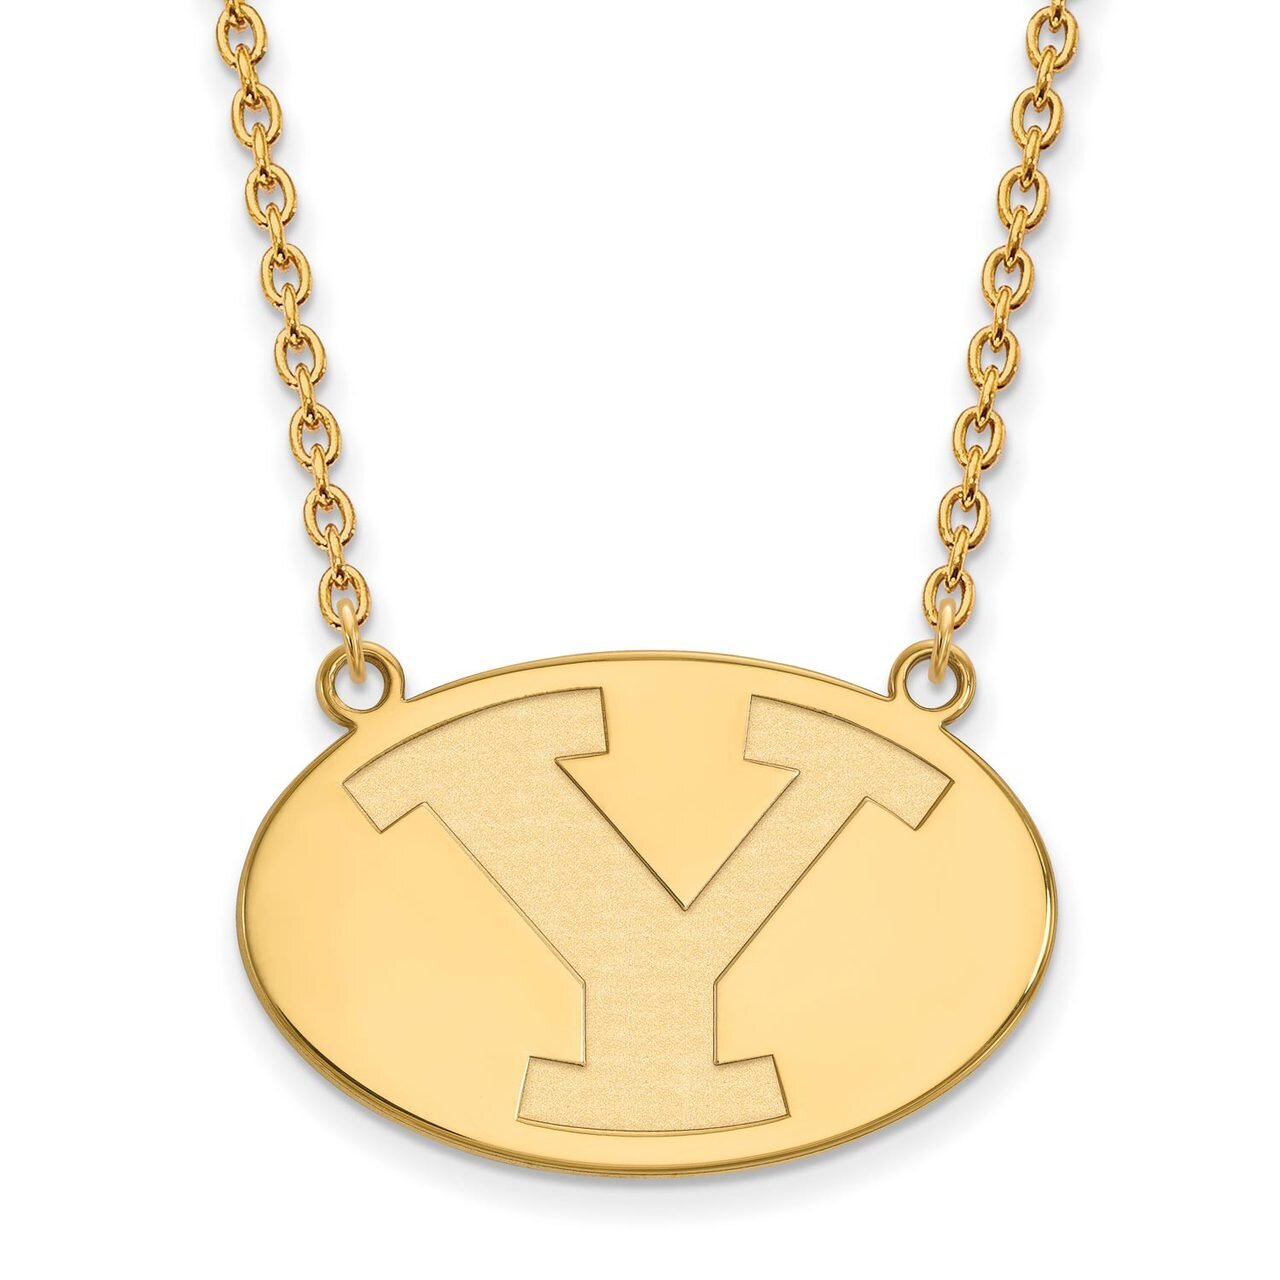 Brigham Young University Large Pendant with Chain Necklace 14k Yellow Gold 4Y010BYU-18